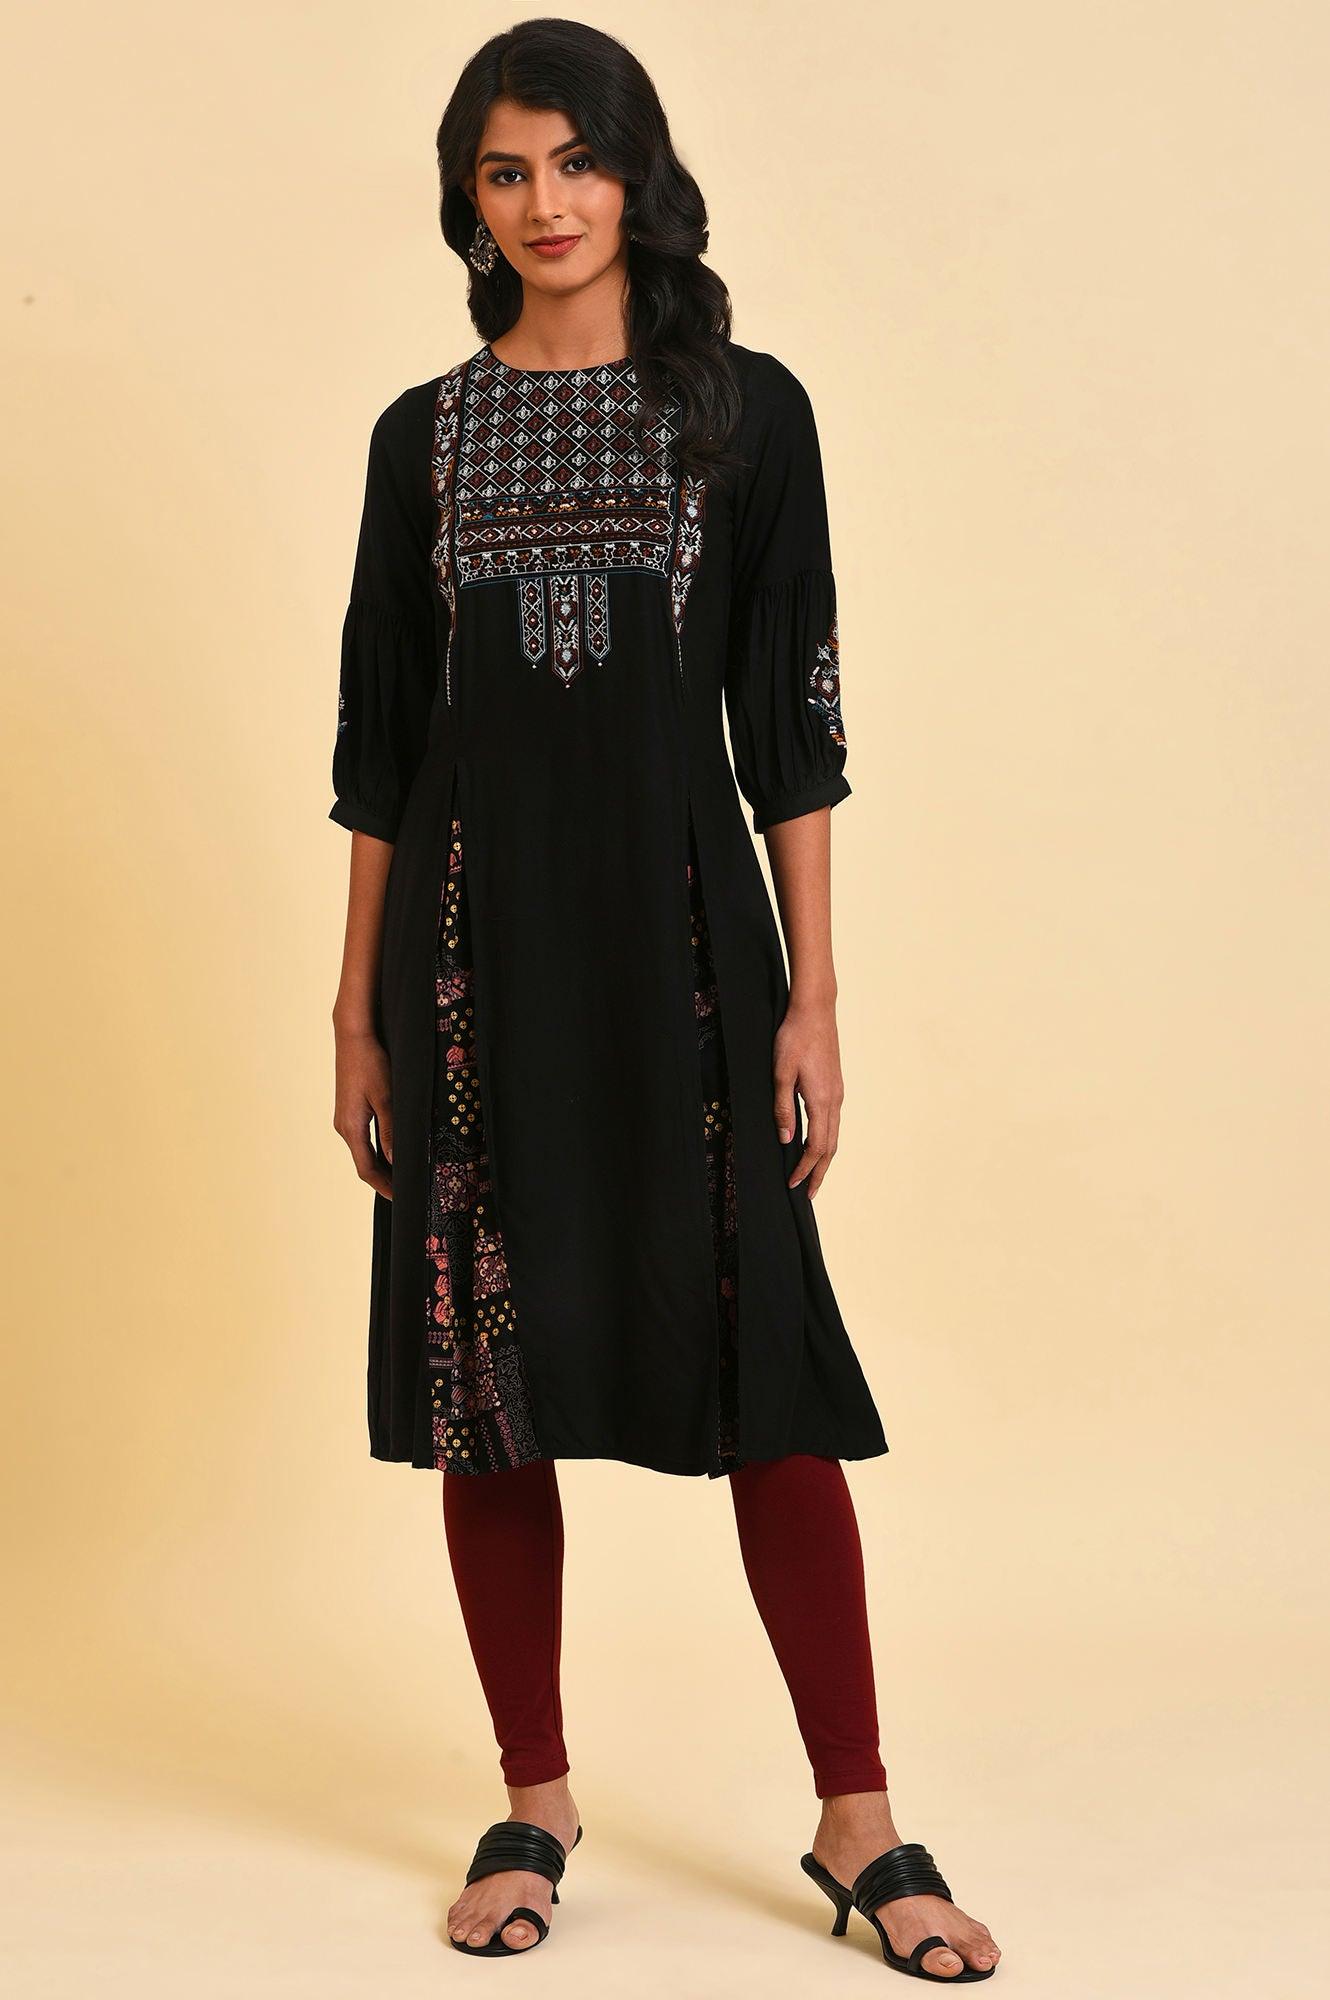 Black Godget Plus Size Tunic with Multi-coloured Embroidery - wforwoman